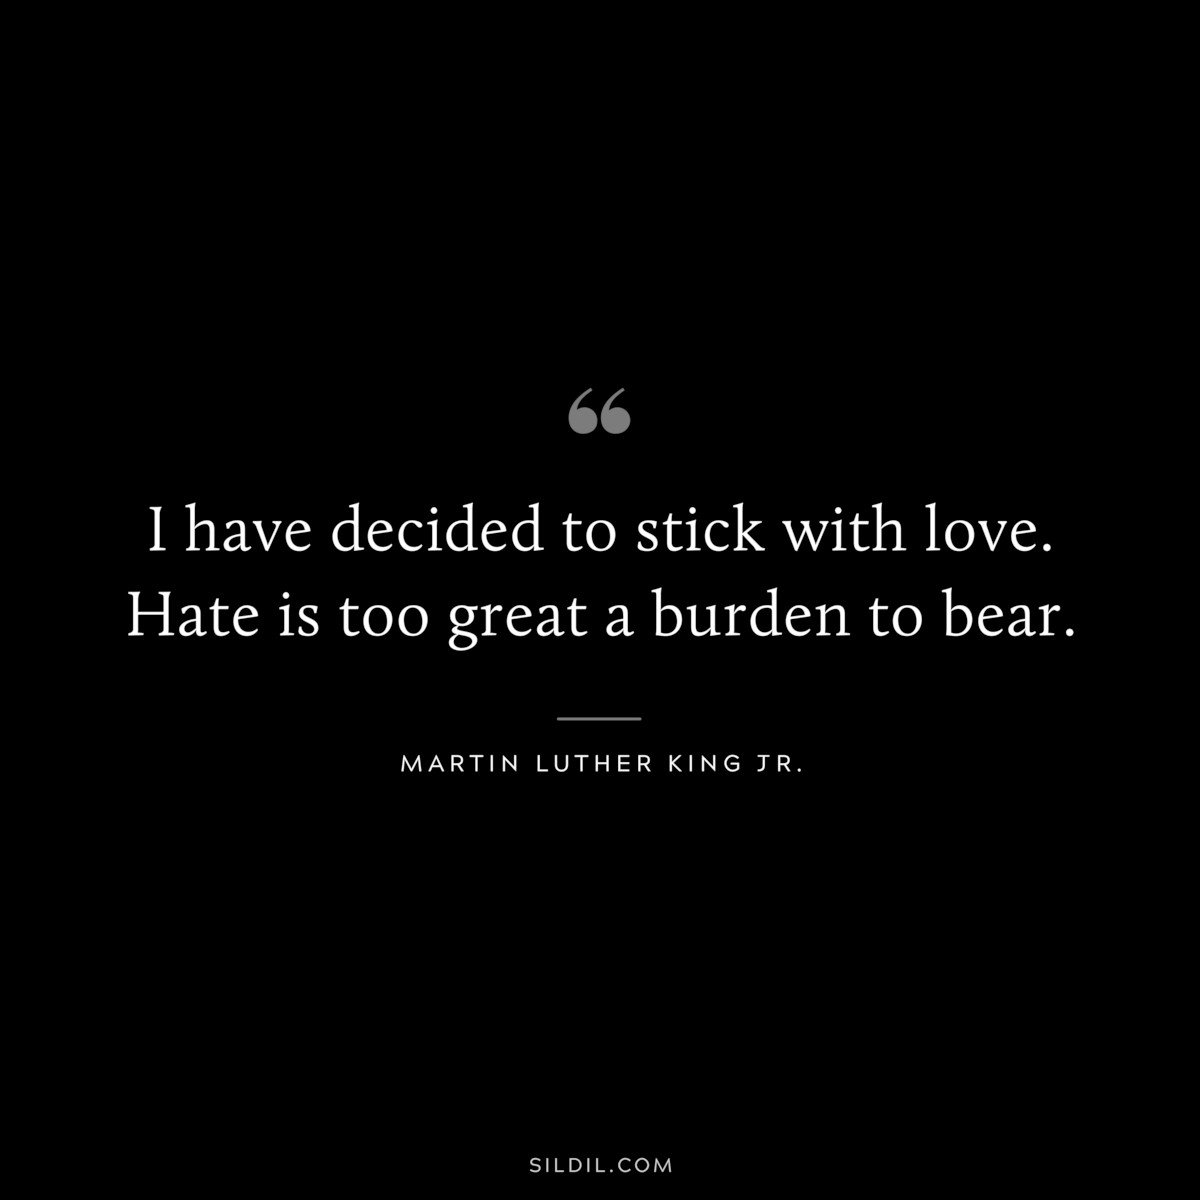 I have decided to stick with love. Hate is too great a burden to bear. ― Martin Luther King Jr.